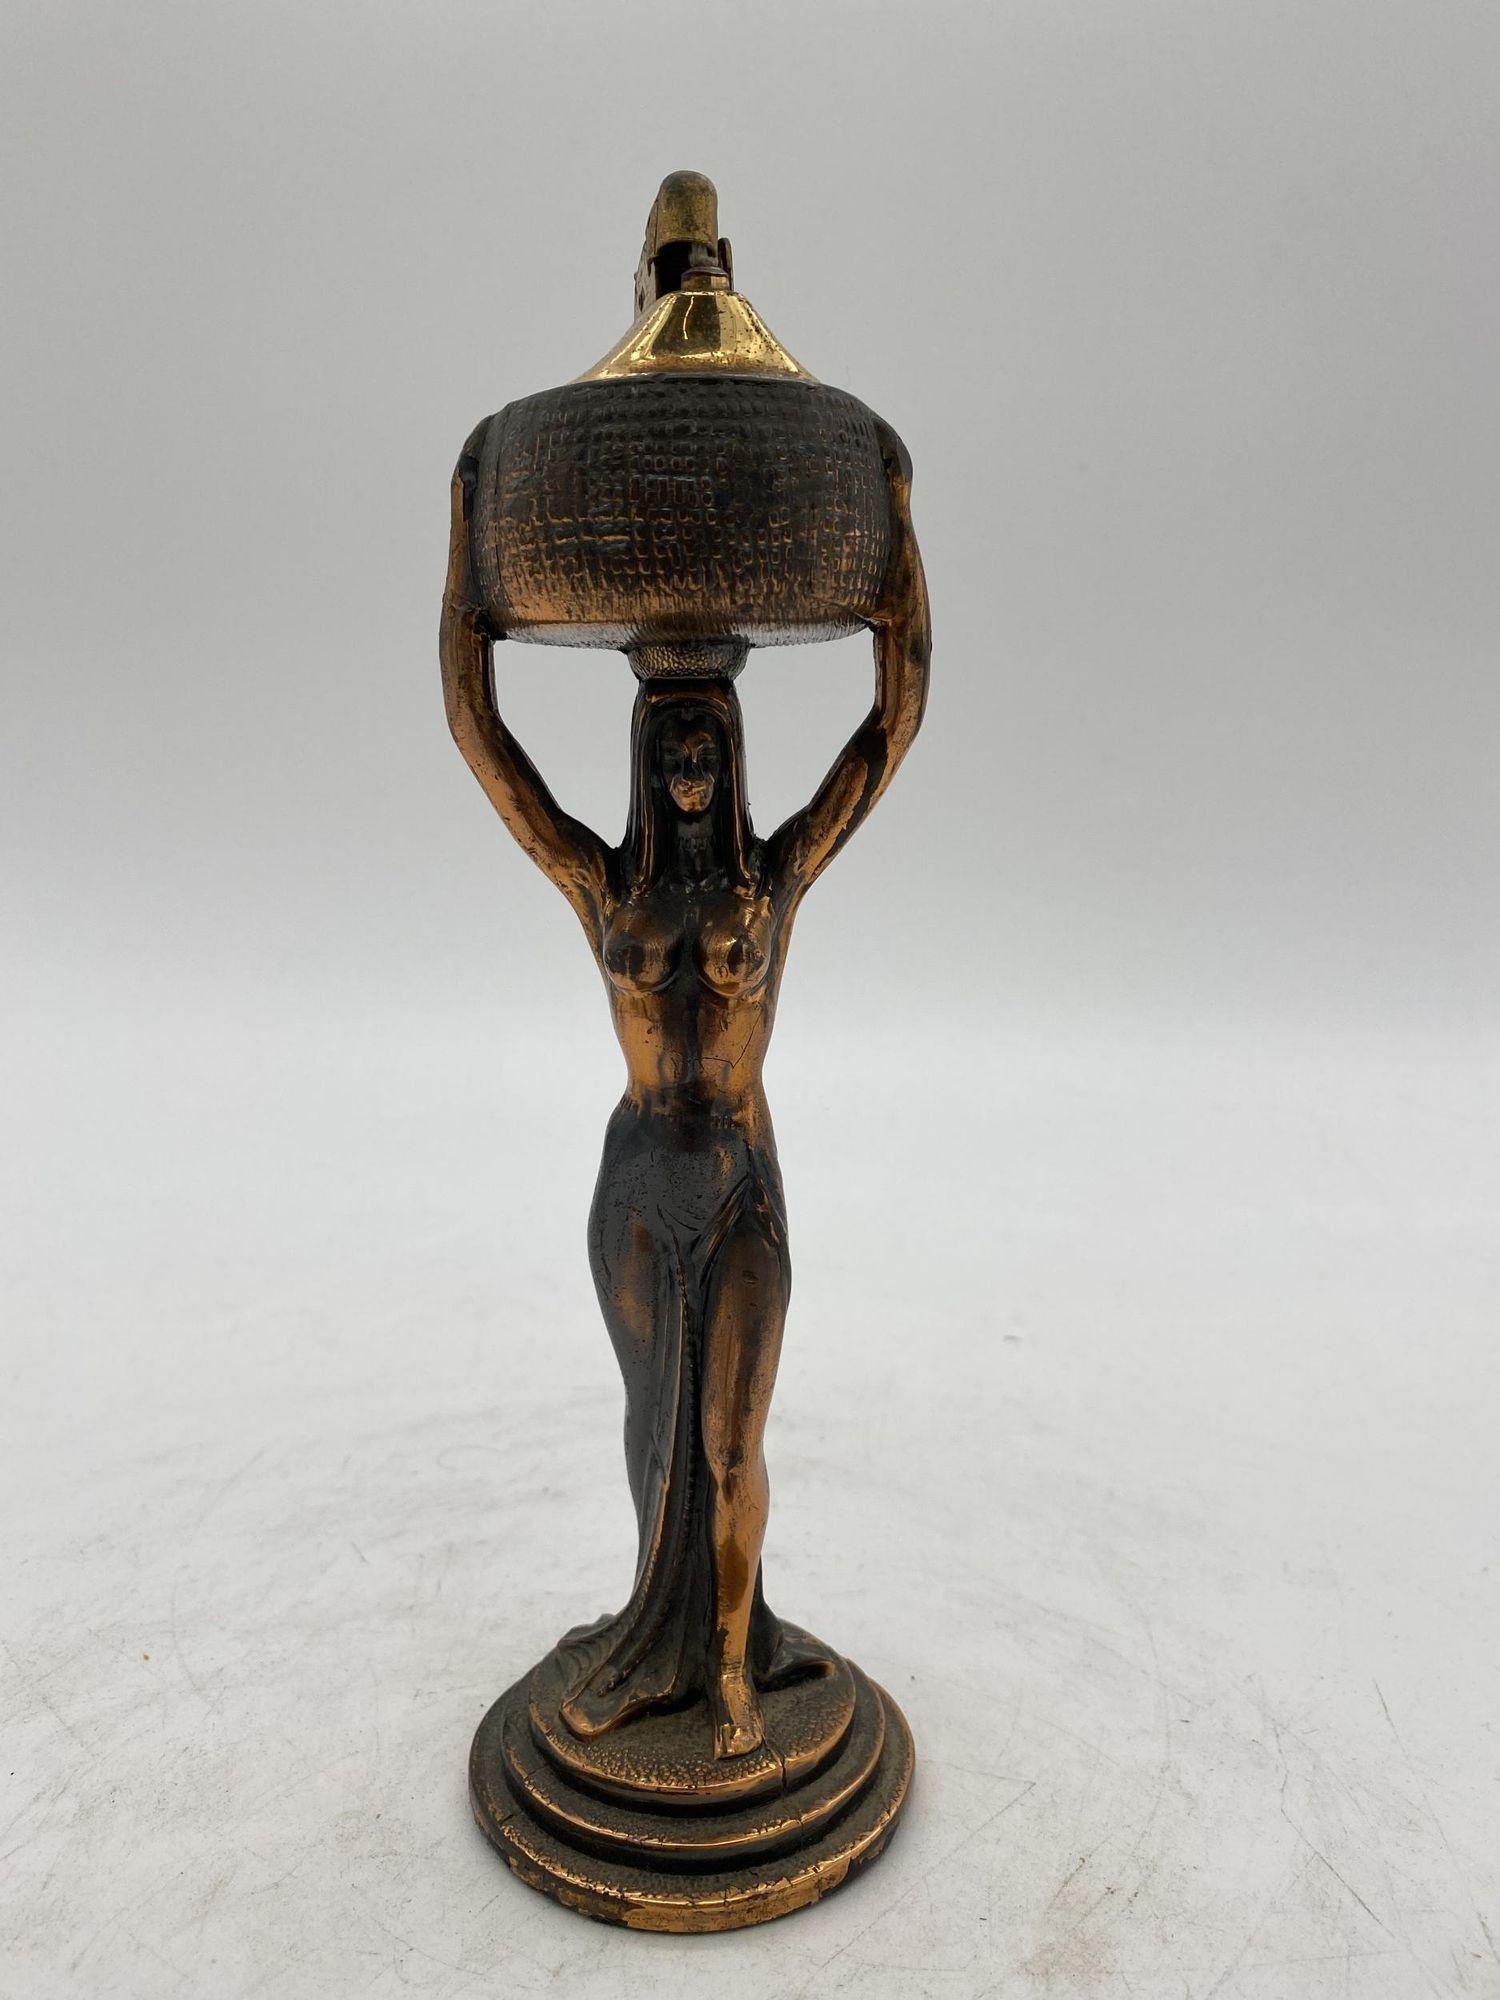 Art Deco era copper Egyptian Revival nude queen Table Lighter featuring a figural lighter with a removable lighter at the top.
1920, United States, comes empty and ready for use.